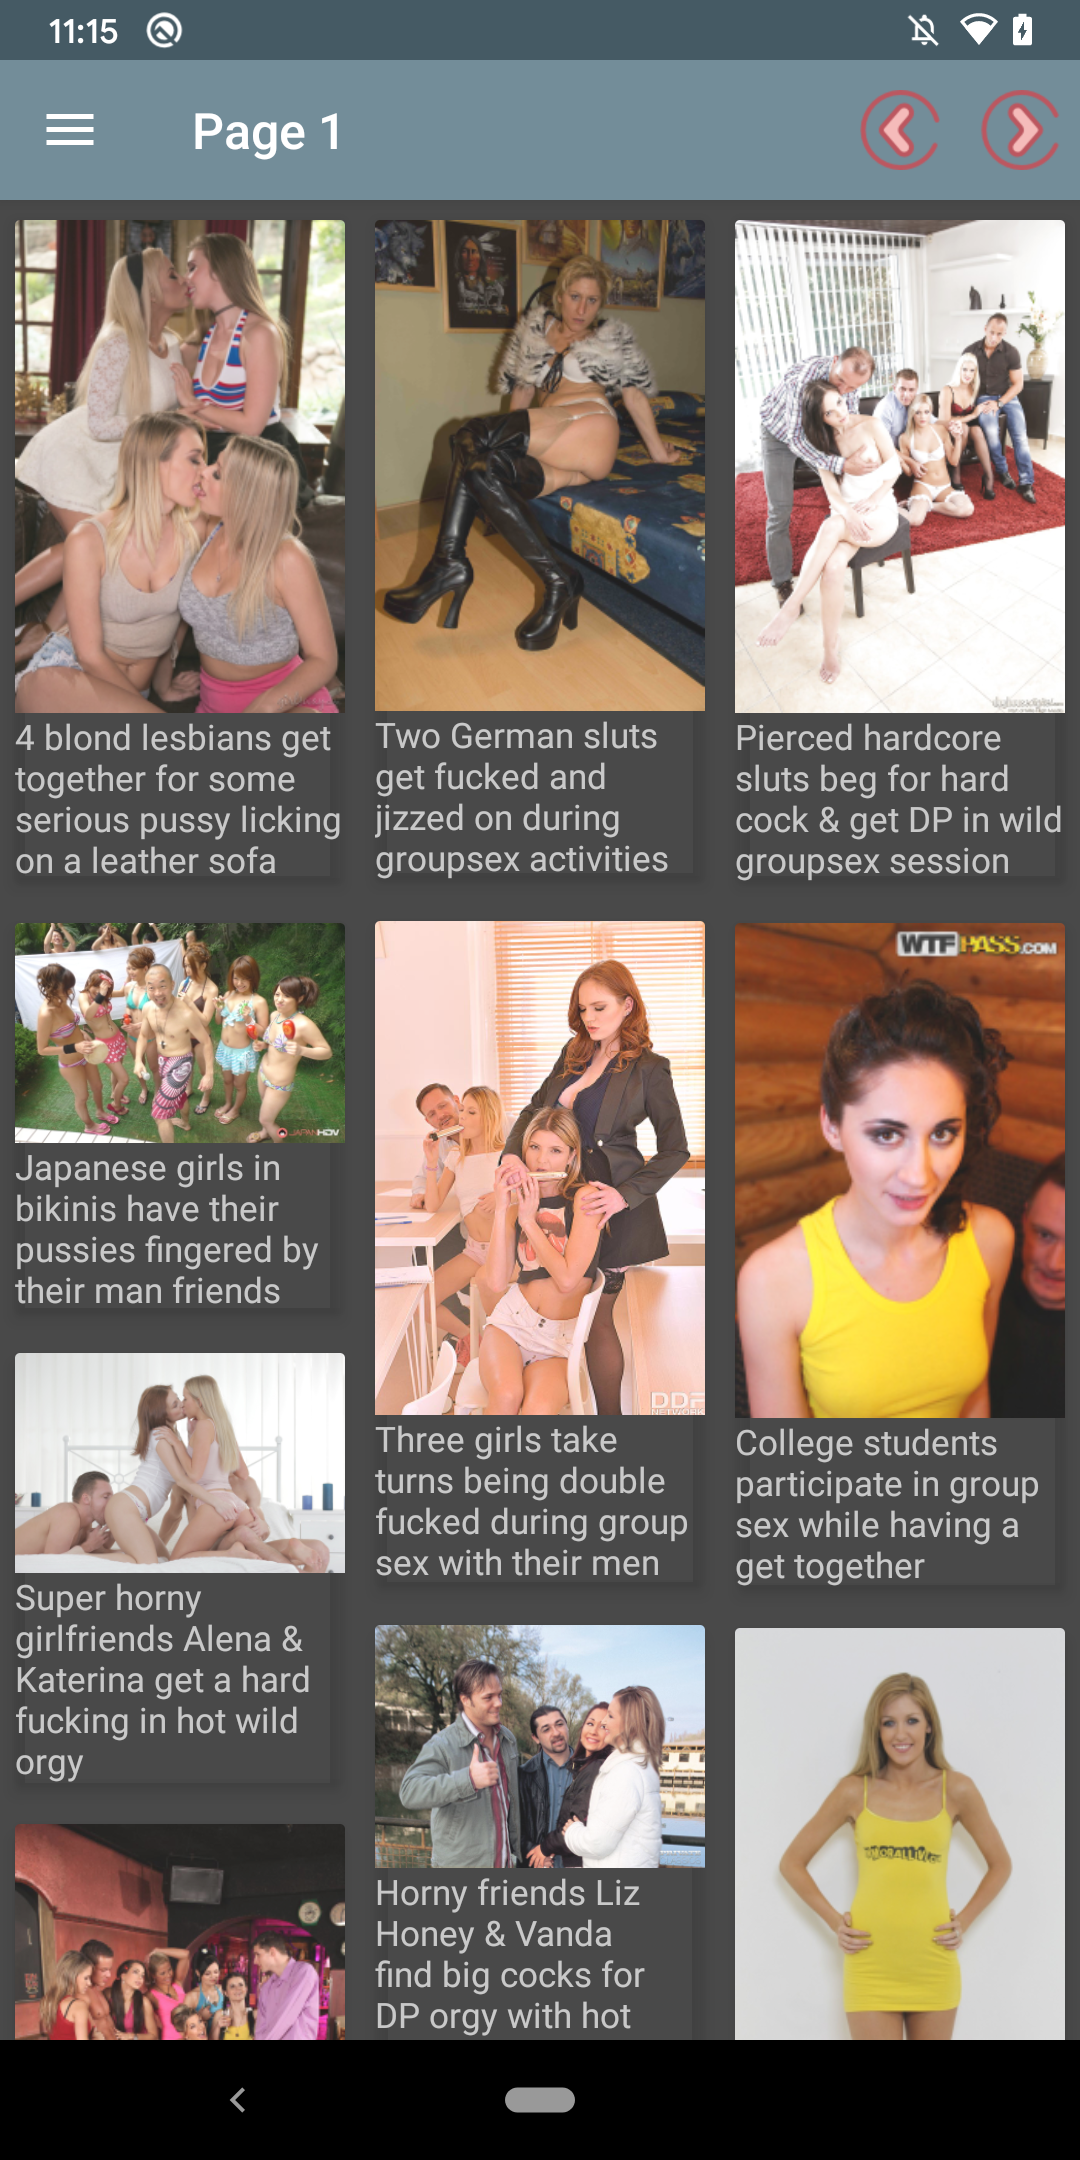 Orgy Galleries porn,sexy,star,apk,wallpaper,app,best,sex,hentai,pics,picture,hot,pictures,henti,galleries,for,android,download,apps,anime,offline